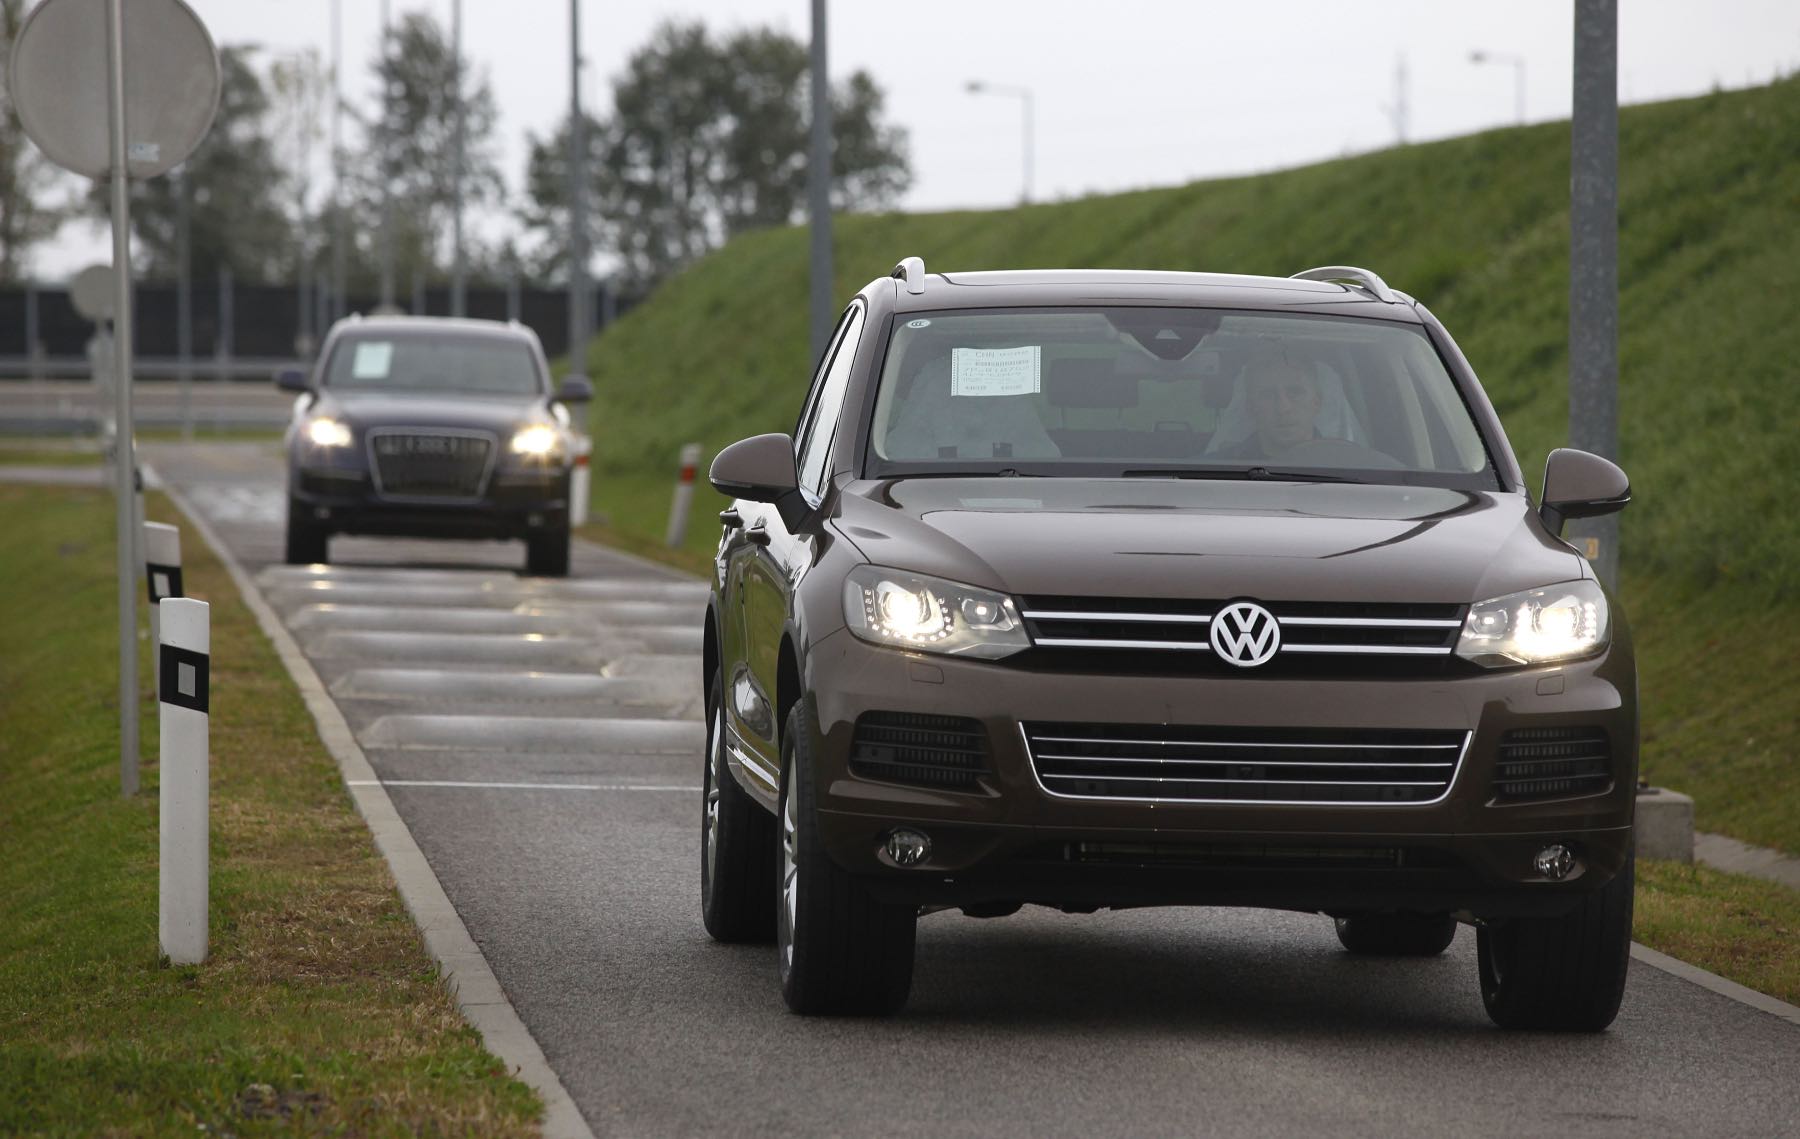 A Volkswagen Touareg undergoes testing. An Audi follows behind in the background.